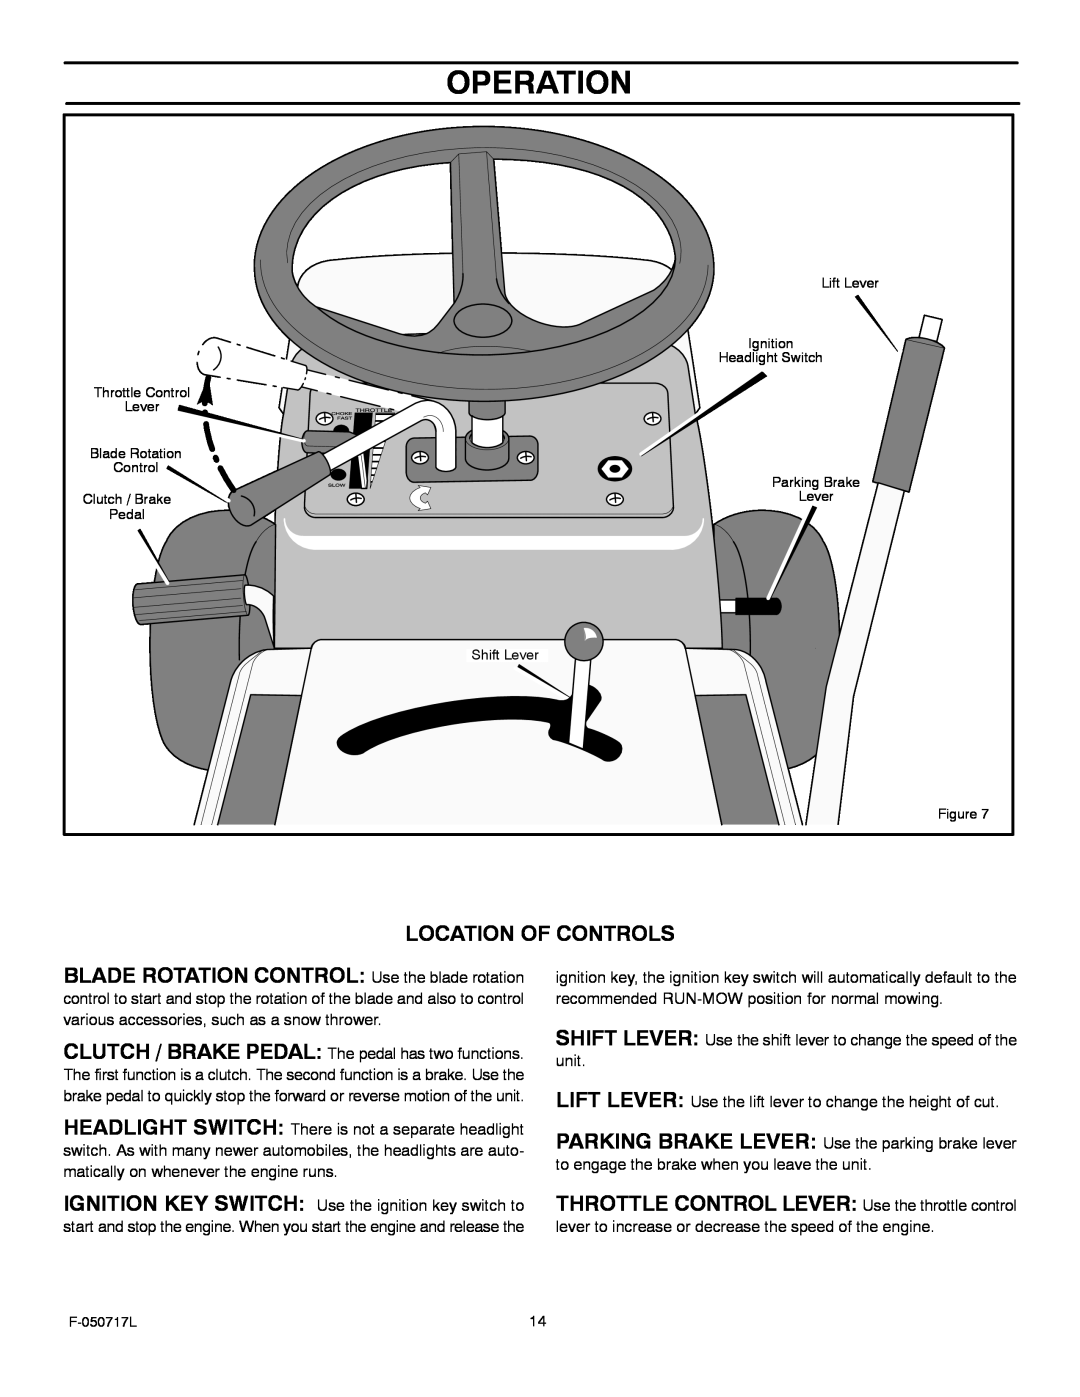 Murray 387002x92D manual Operation, Location Of Controls, BLADE ROTATION CONTROL Use the blade rotation, Lift Lever 